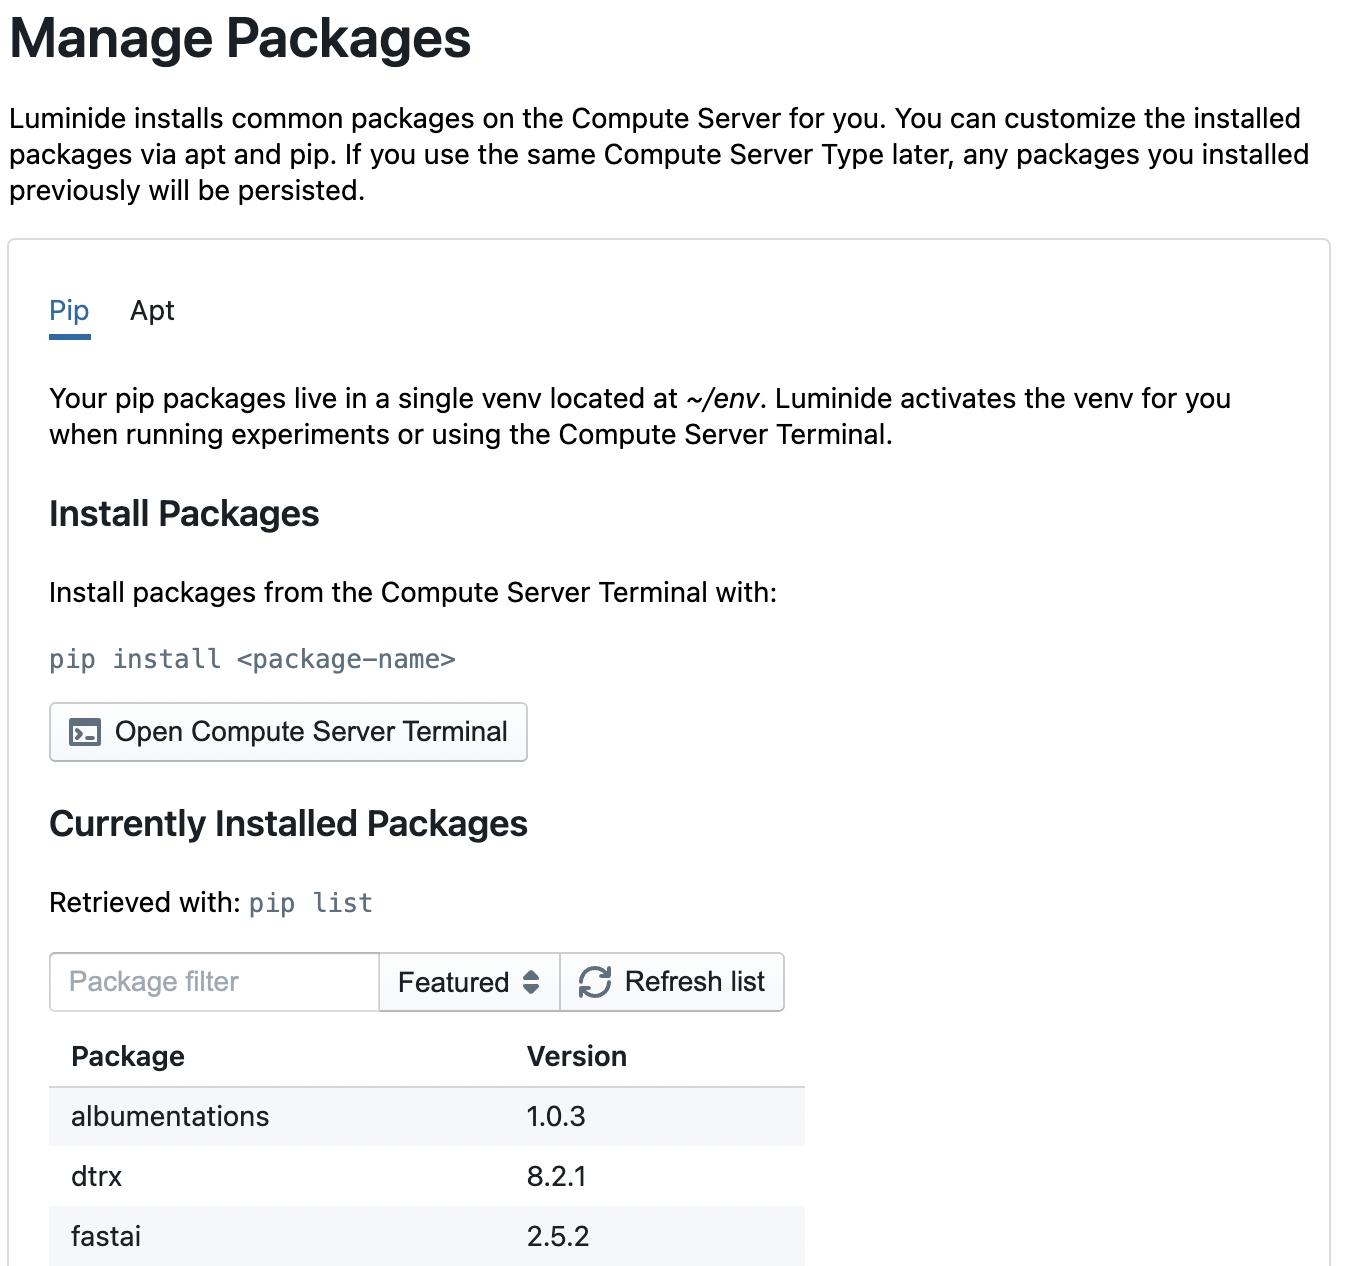 ../_images/feb-manage-packages.png